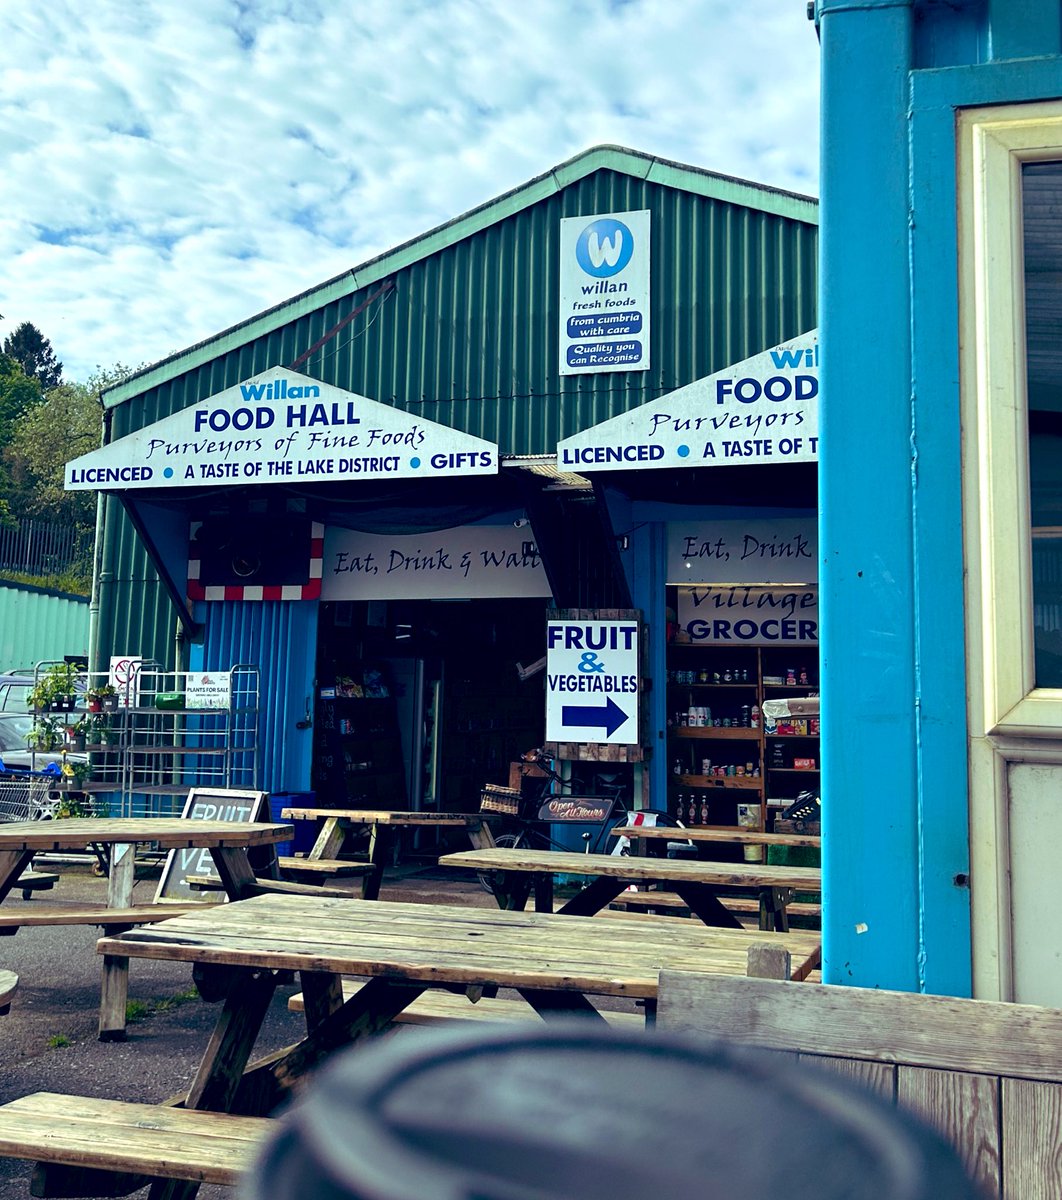 The morning fuel stop ☕️ 

📍Oxenholme Lake District 

🔵🔵🔵

#LocalNewandFighting4You #Matty4WestmorlandandLonsdale #Conservatives #Matty4WandL #LakeDistrict #Cumbria #Westmorland #Lonsdale mattyjackman.uk